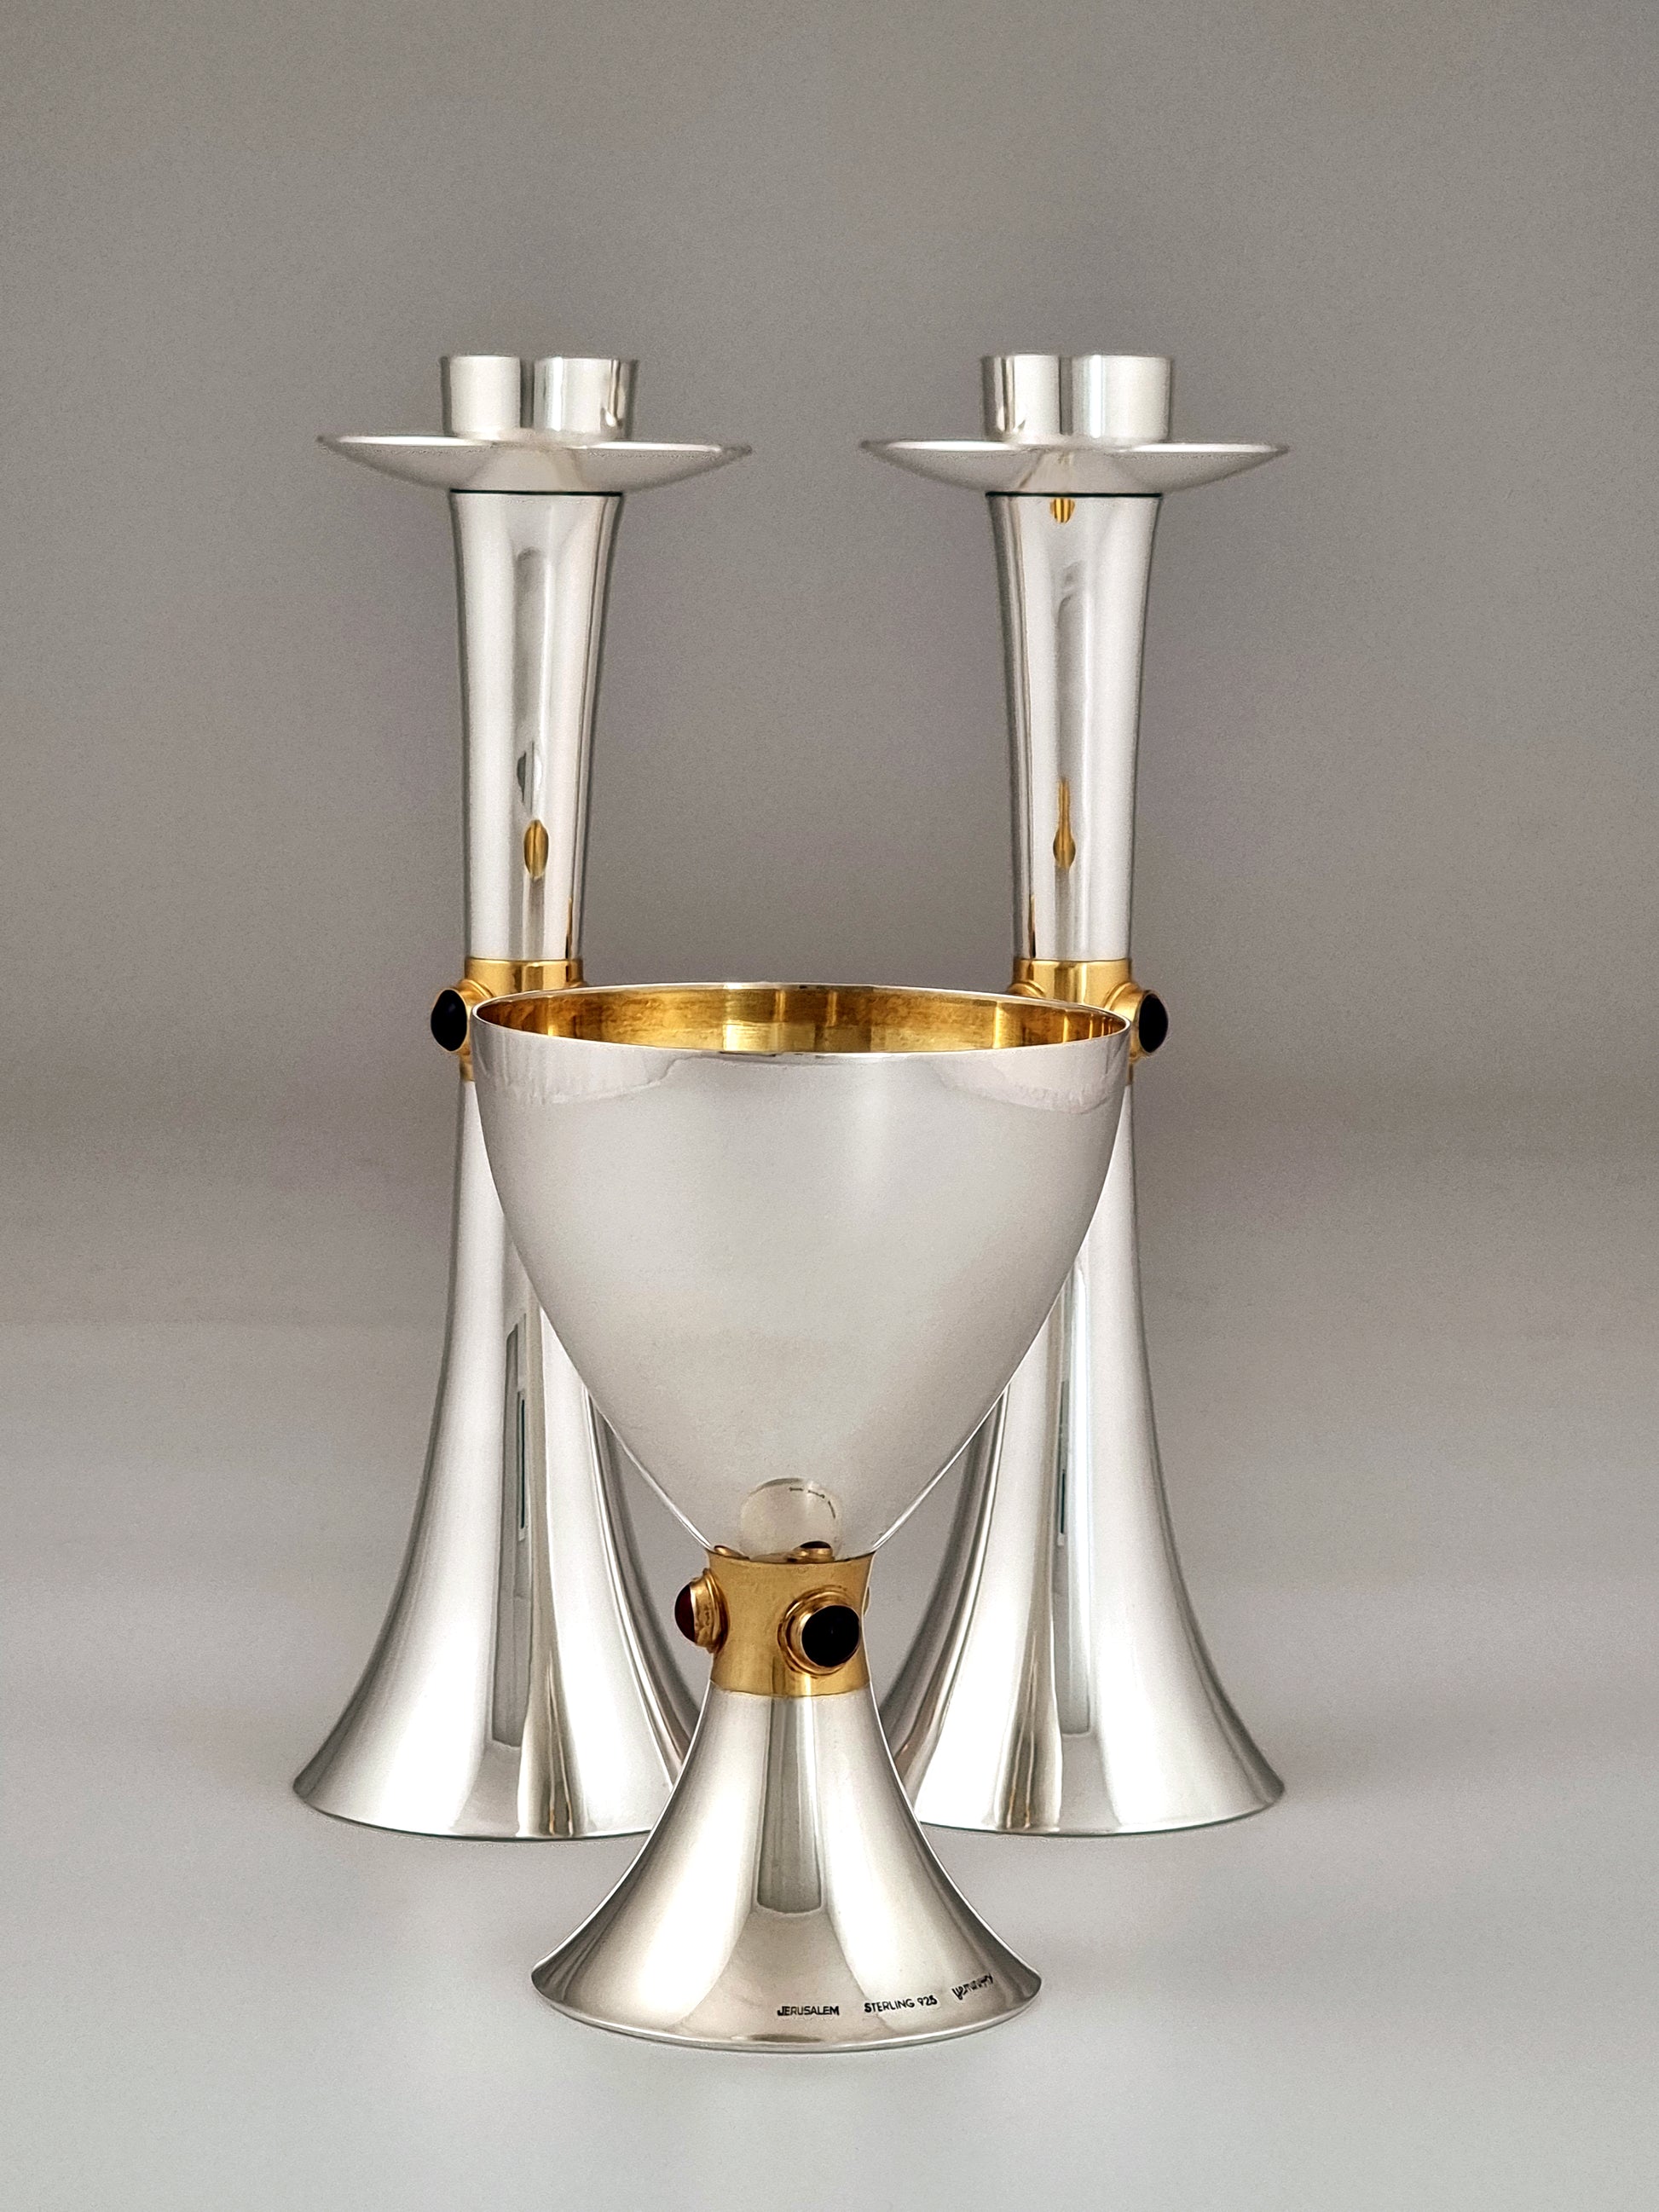 A perfect match of candlesticks and Kiddush cup in The Deborah set